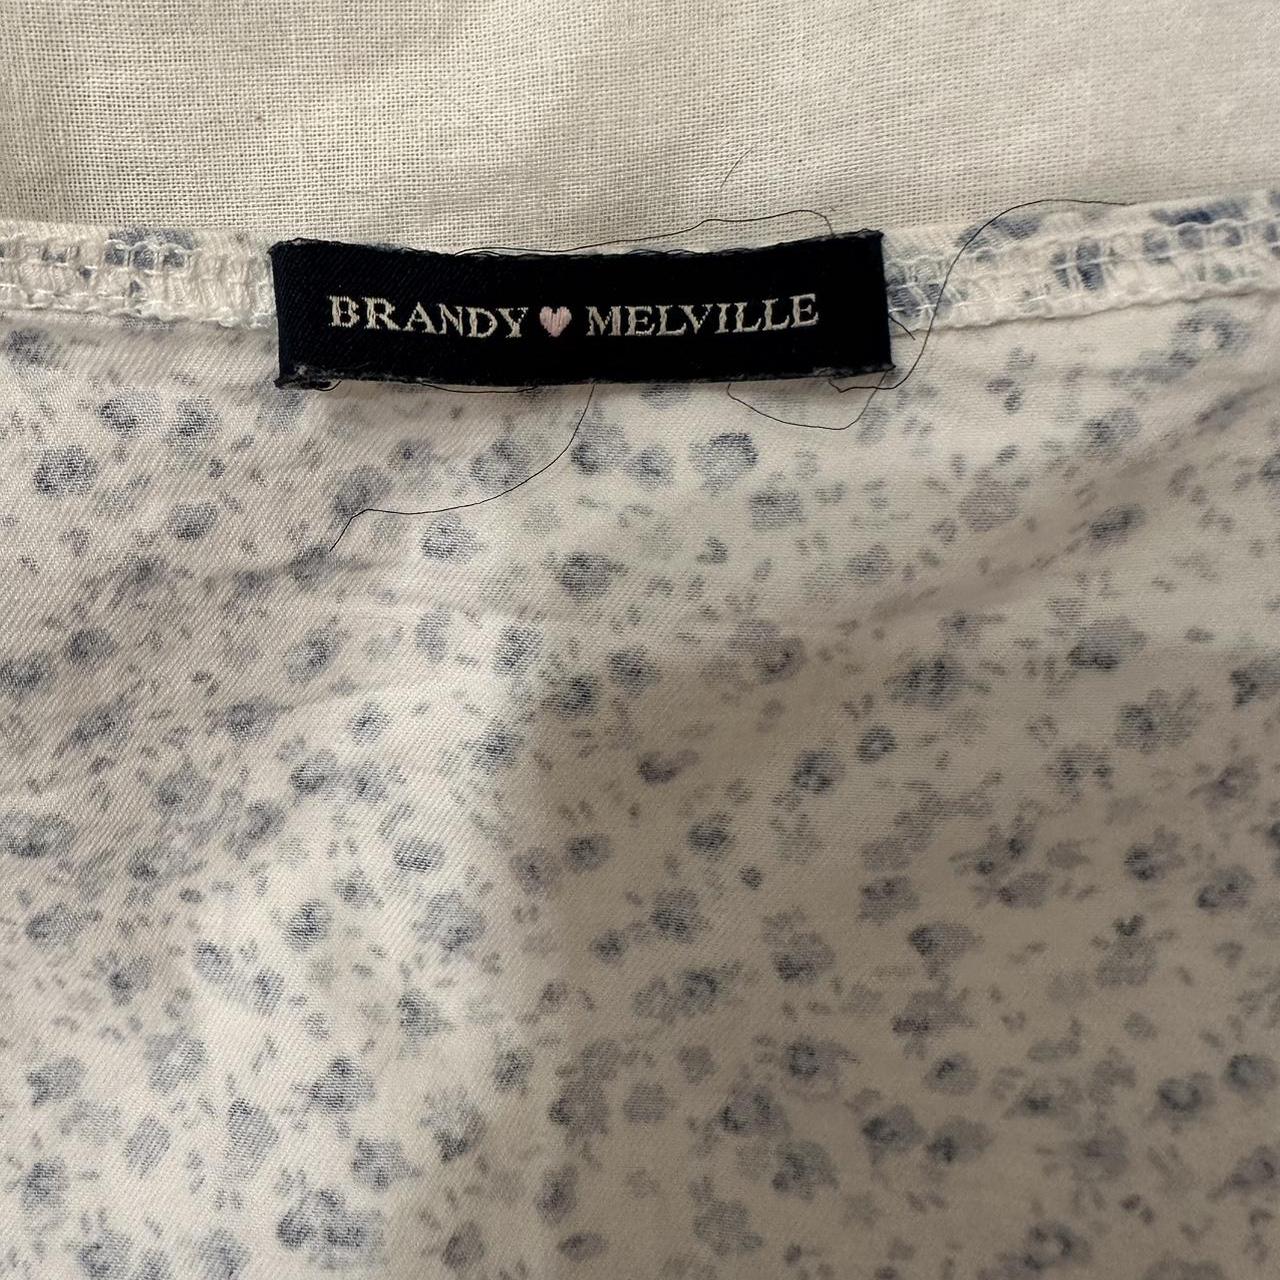 Brandy Melville Blair dress in blue and white floral - Depop